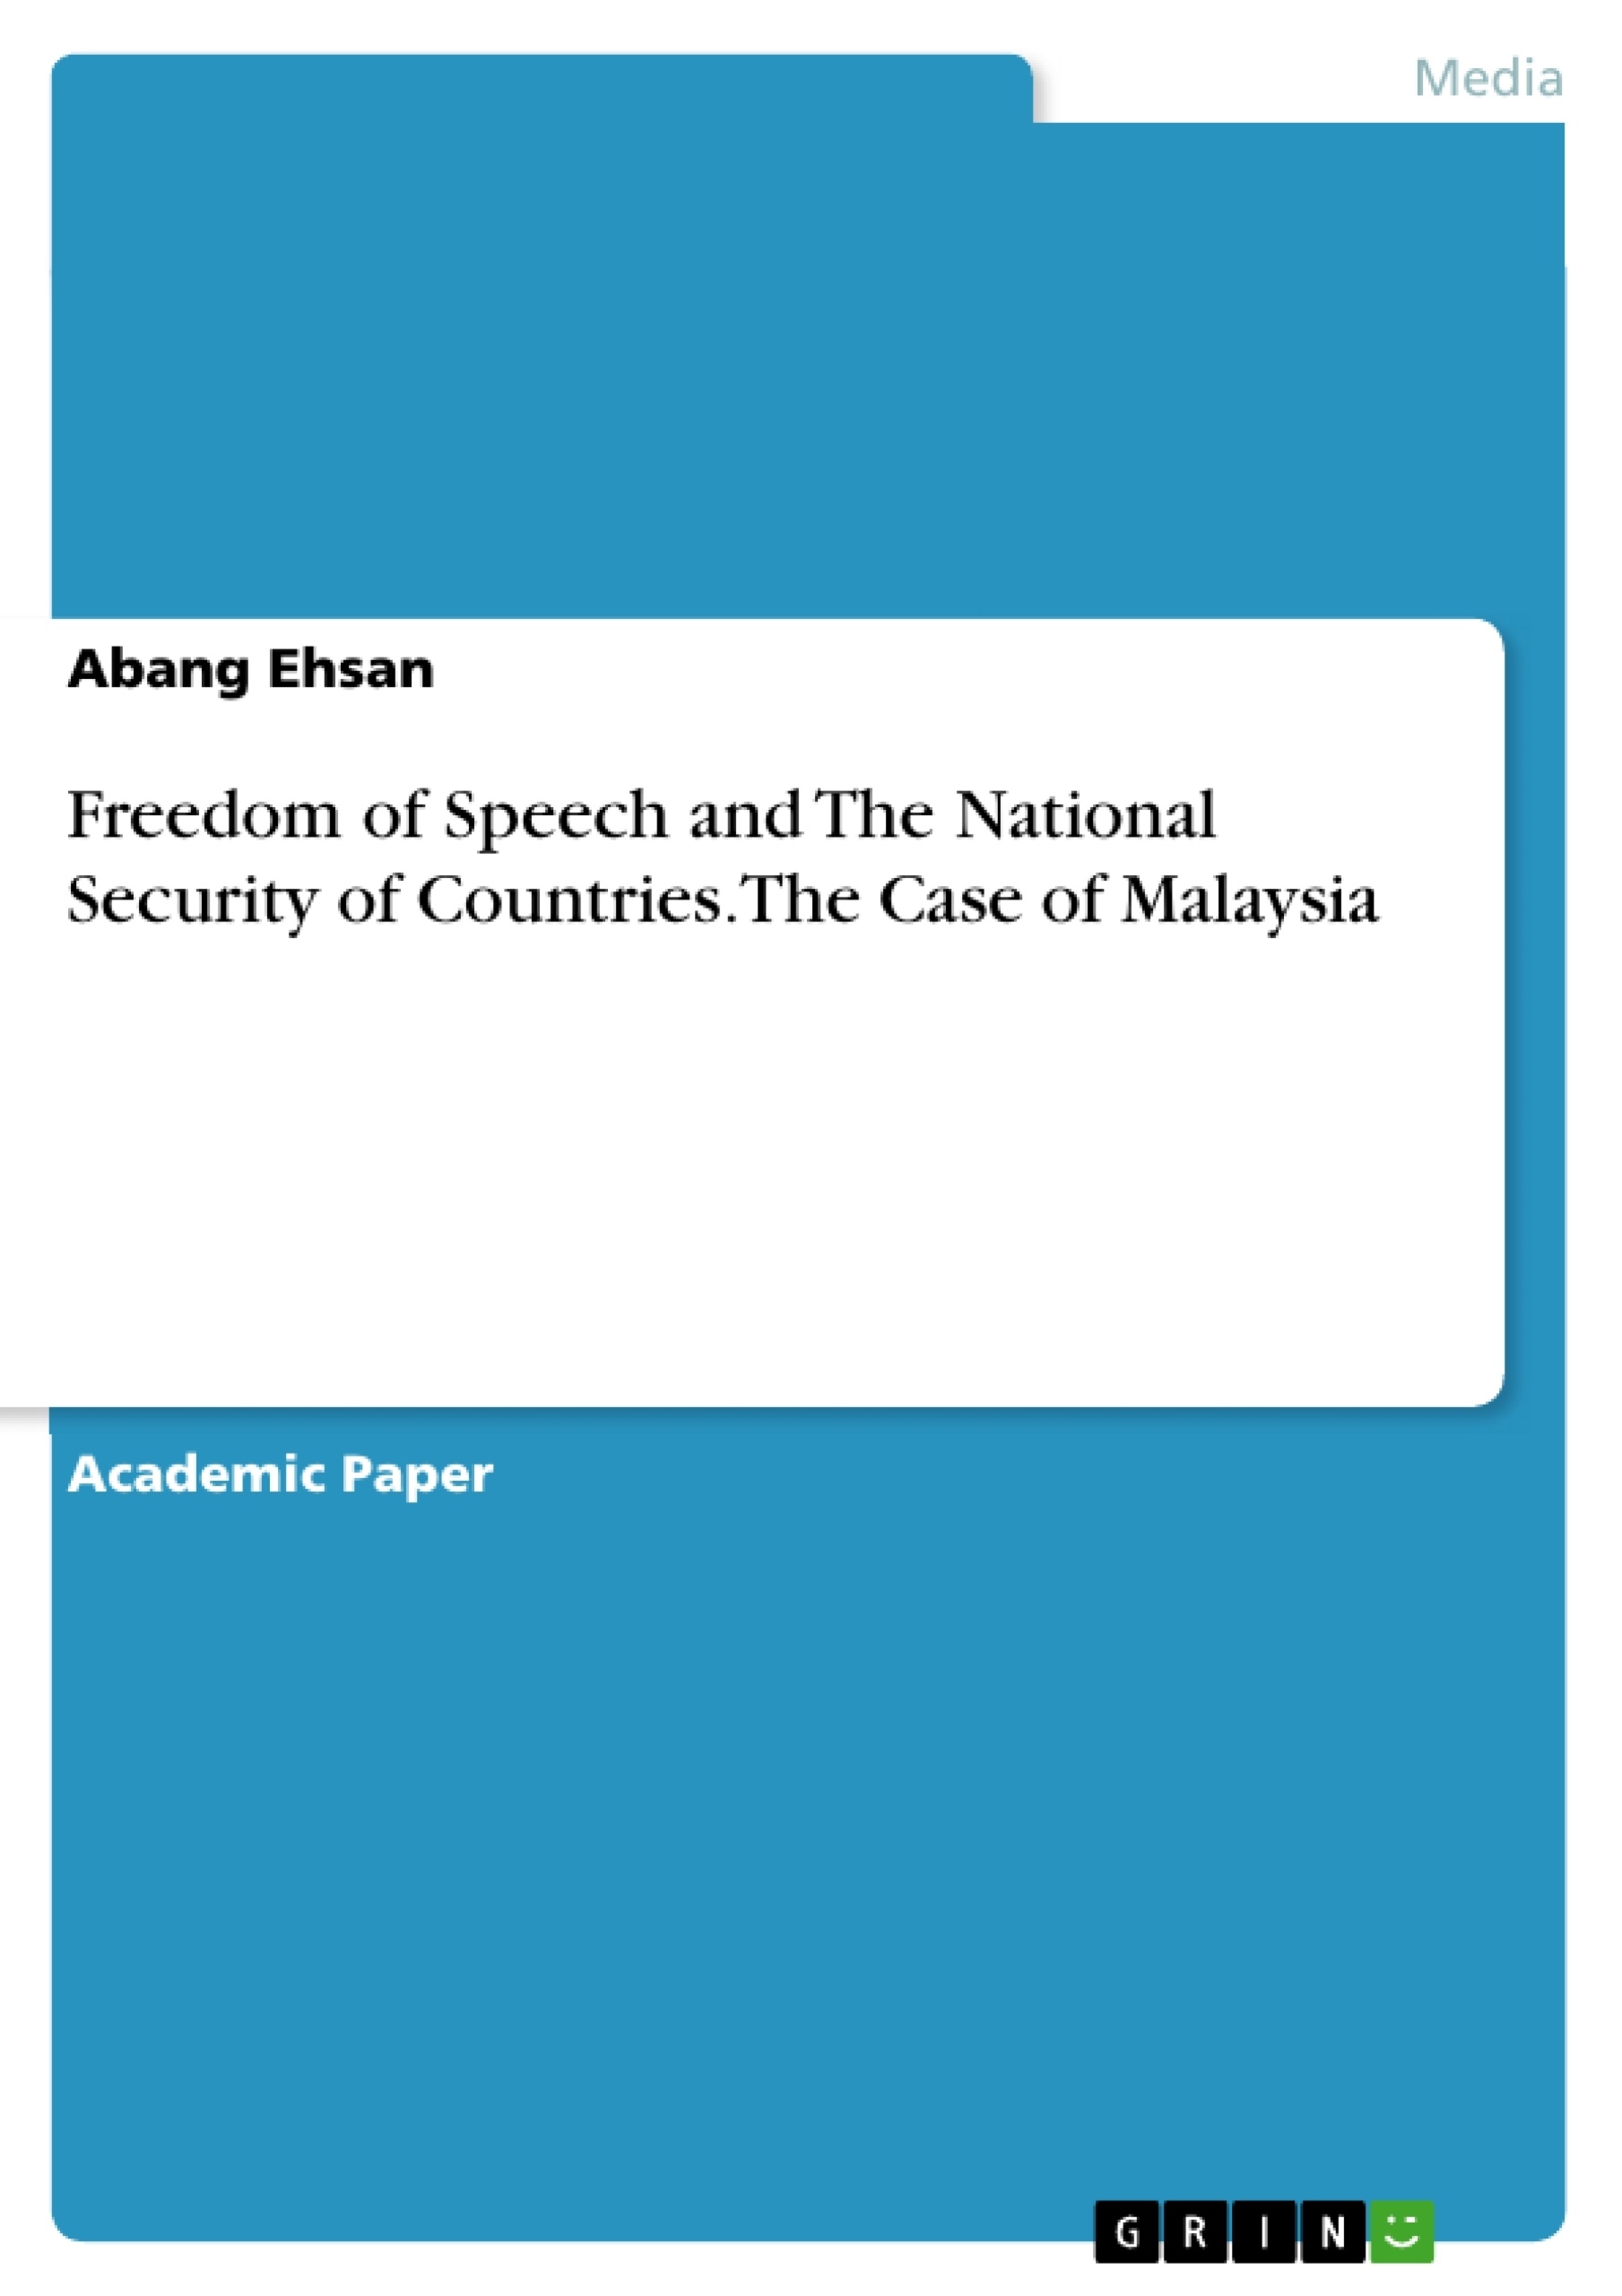 Título: Freedom of Speech and The National Security of Countries. The Case of Malaysia